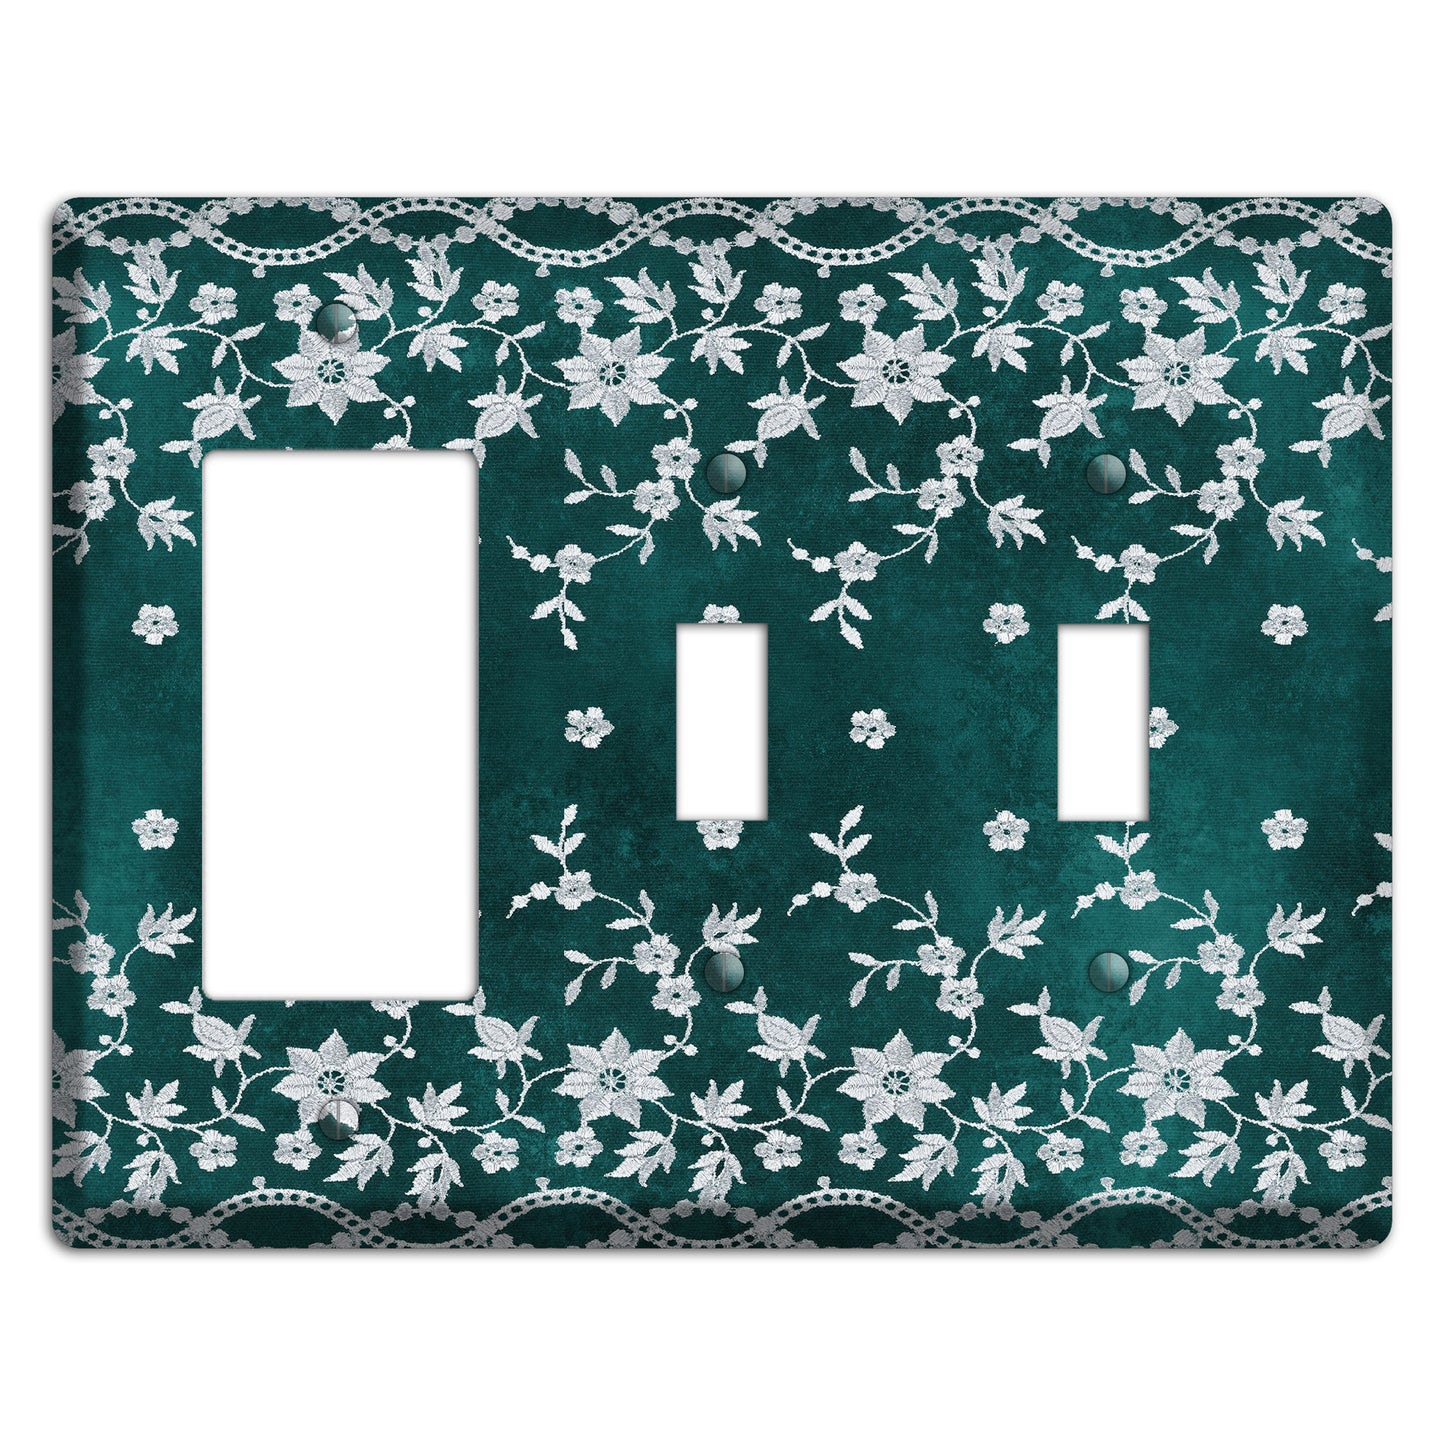 Embroidered Floral Teal Rocker / 2 Toggle Wallplate